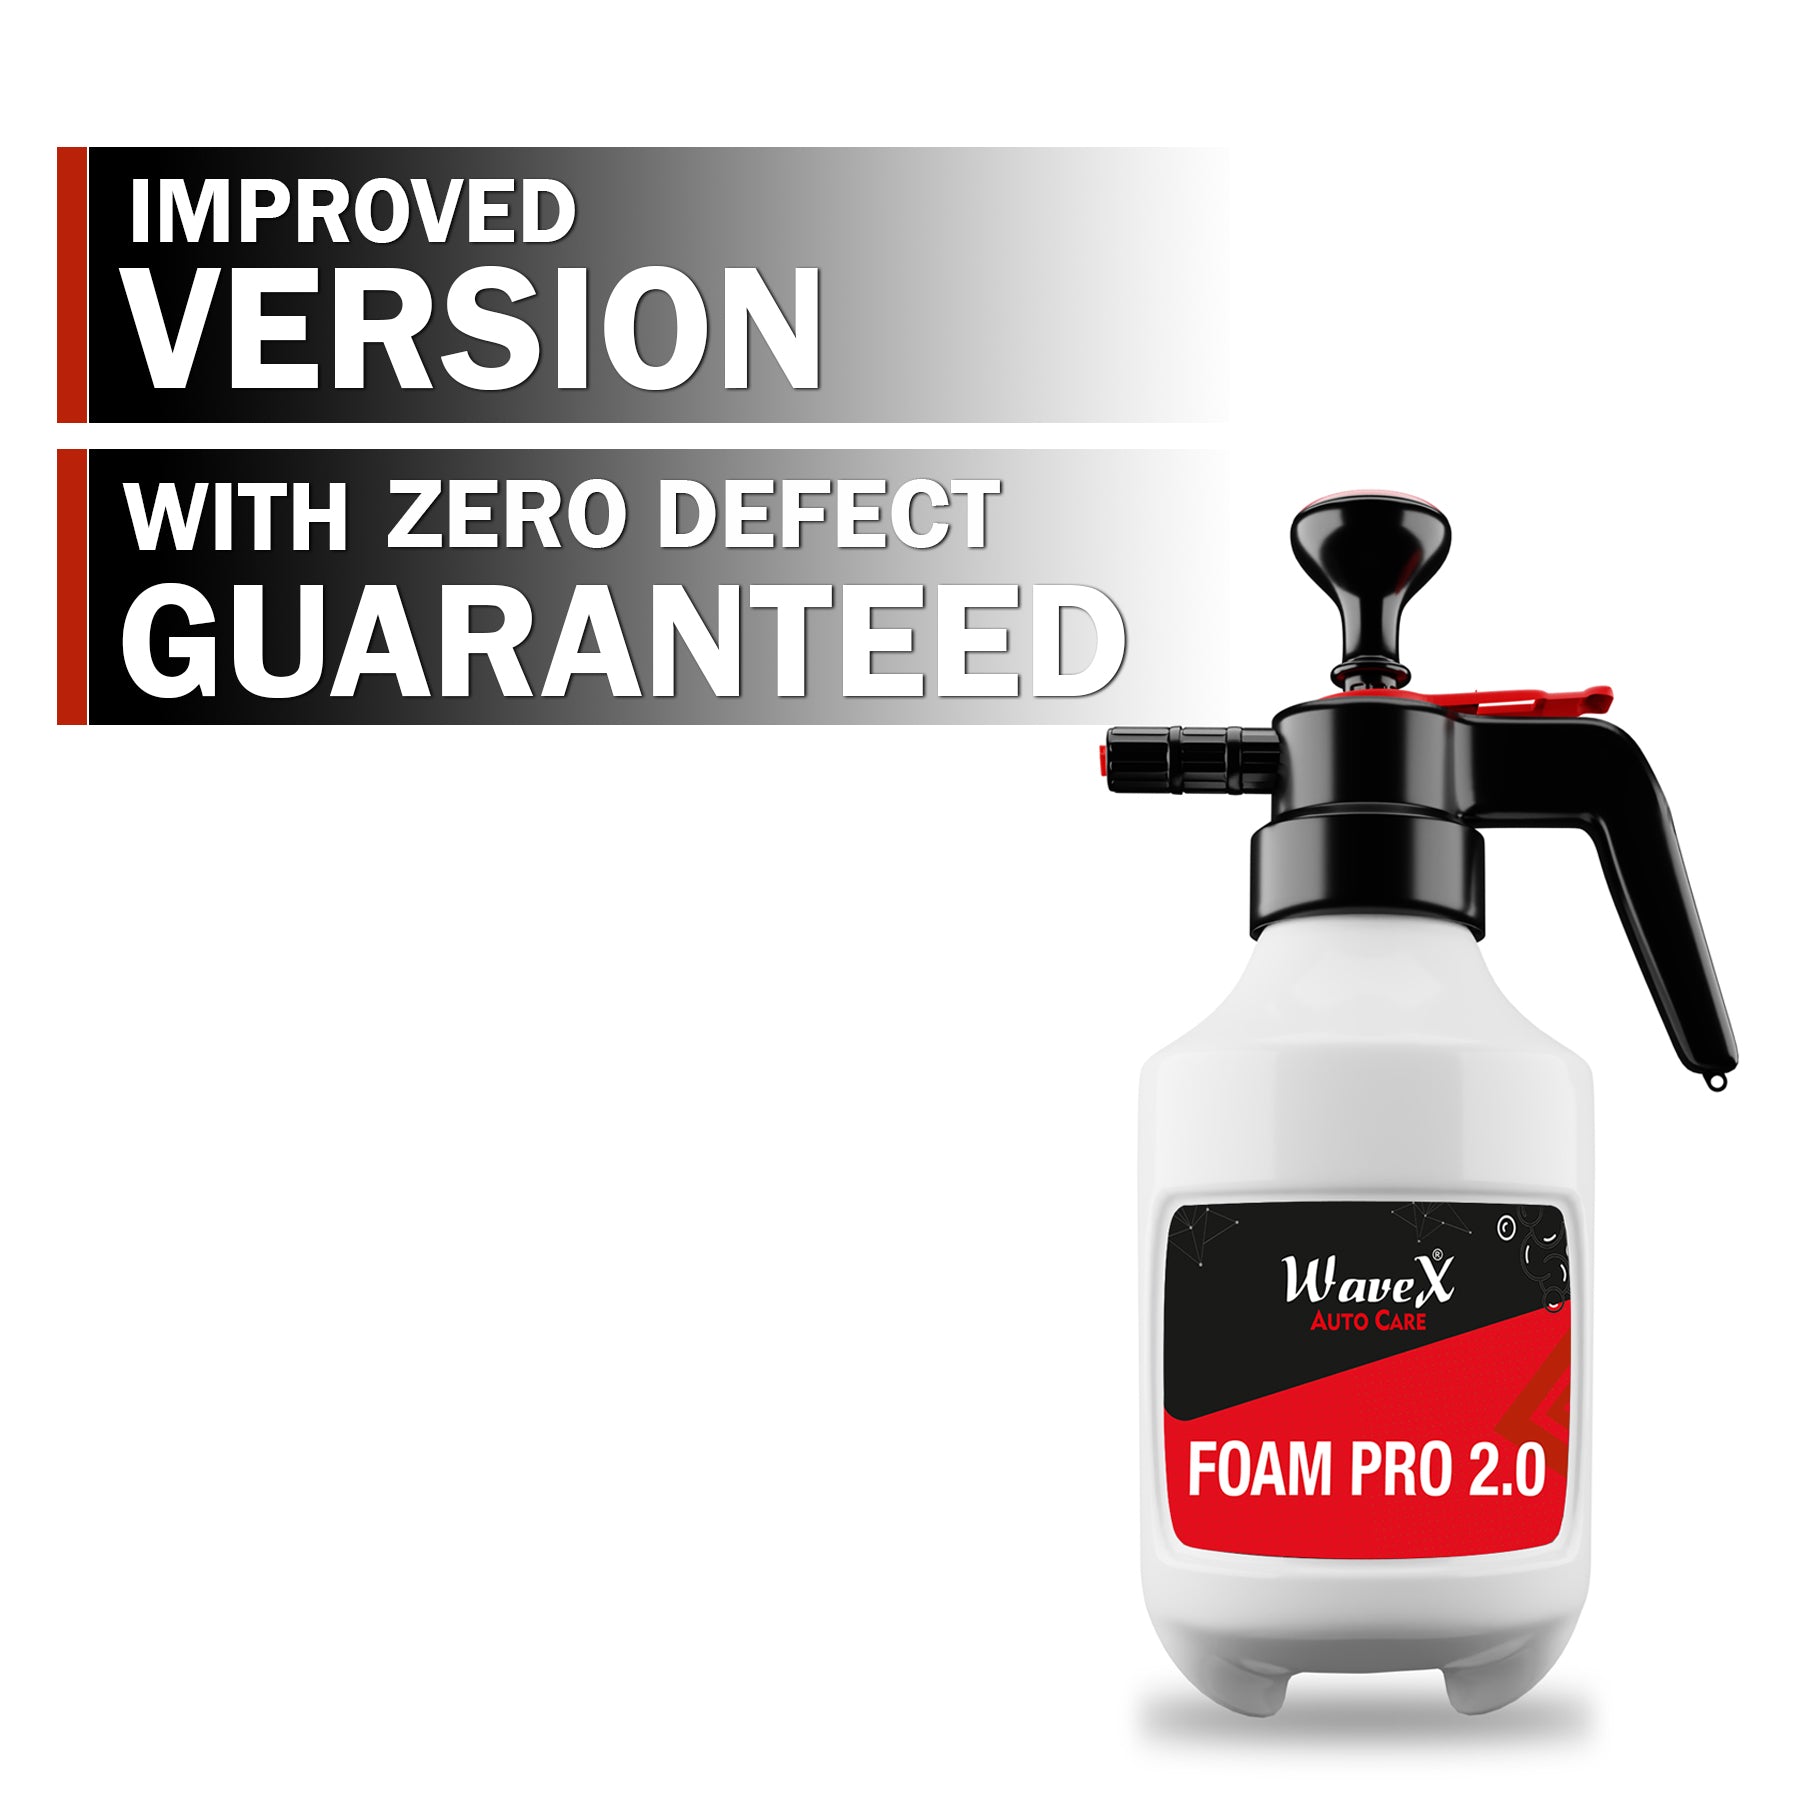 Foam sprayer for car washing - Foam Pro2.0 Foaming Pump Sprayer Combo–Includes Improved Pressure Foam Sprayer for Car Cleaning Car Wash, All Wheel & Tyre Cleaner Acid-Free Formulation All Wheel Safe & Dual Side Tyre Cleaning Brush